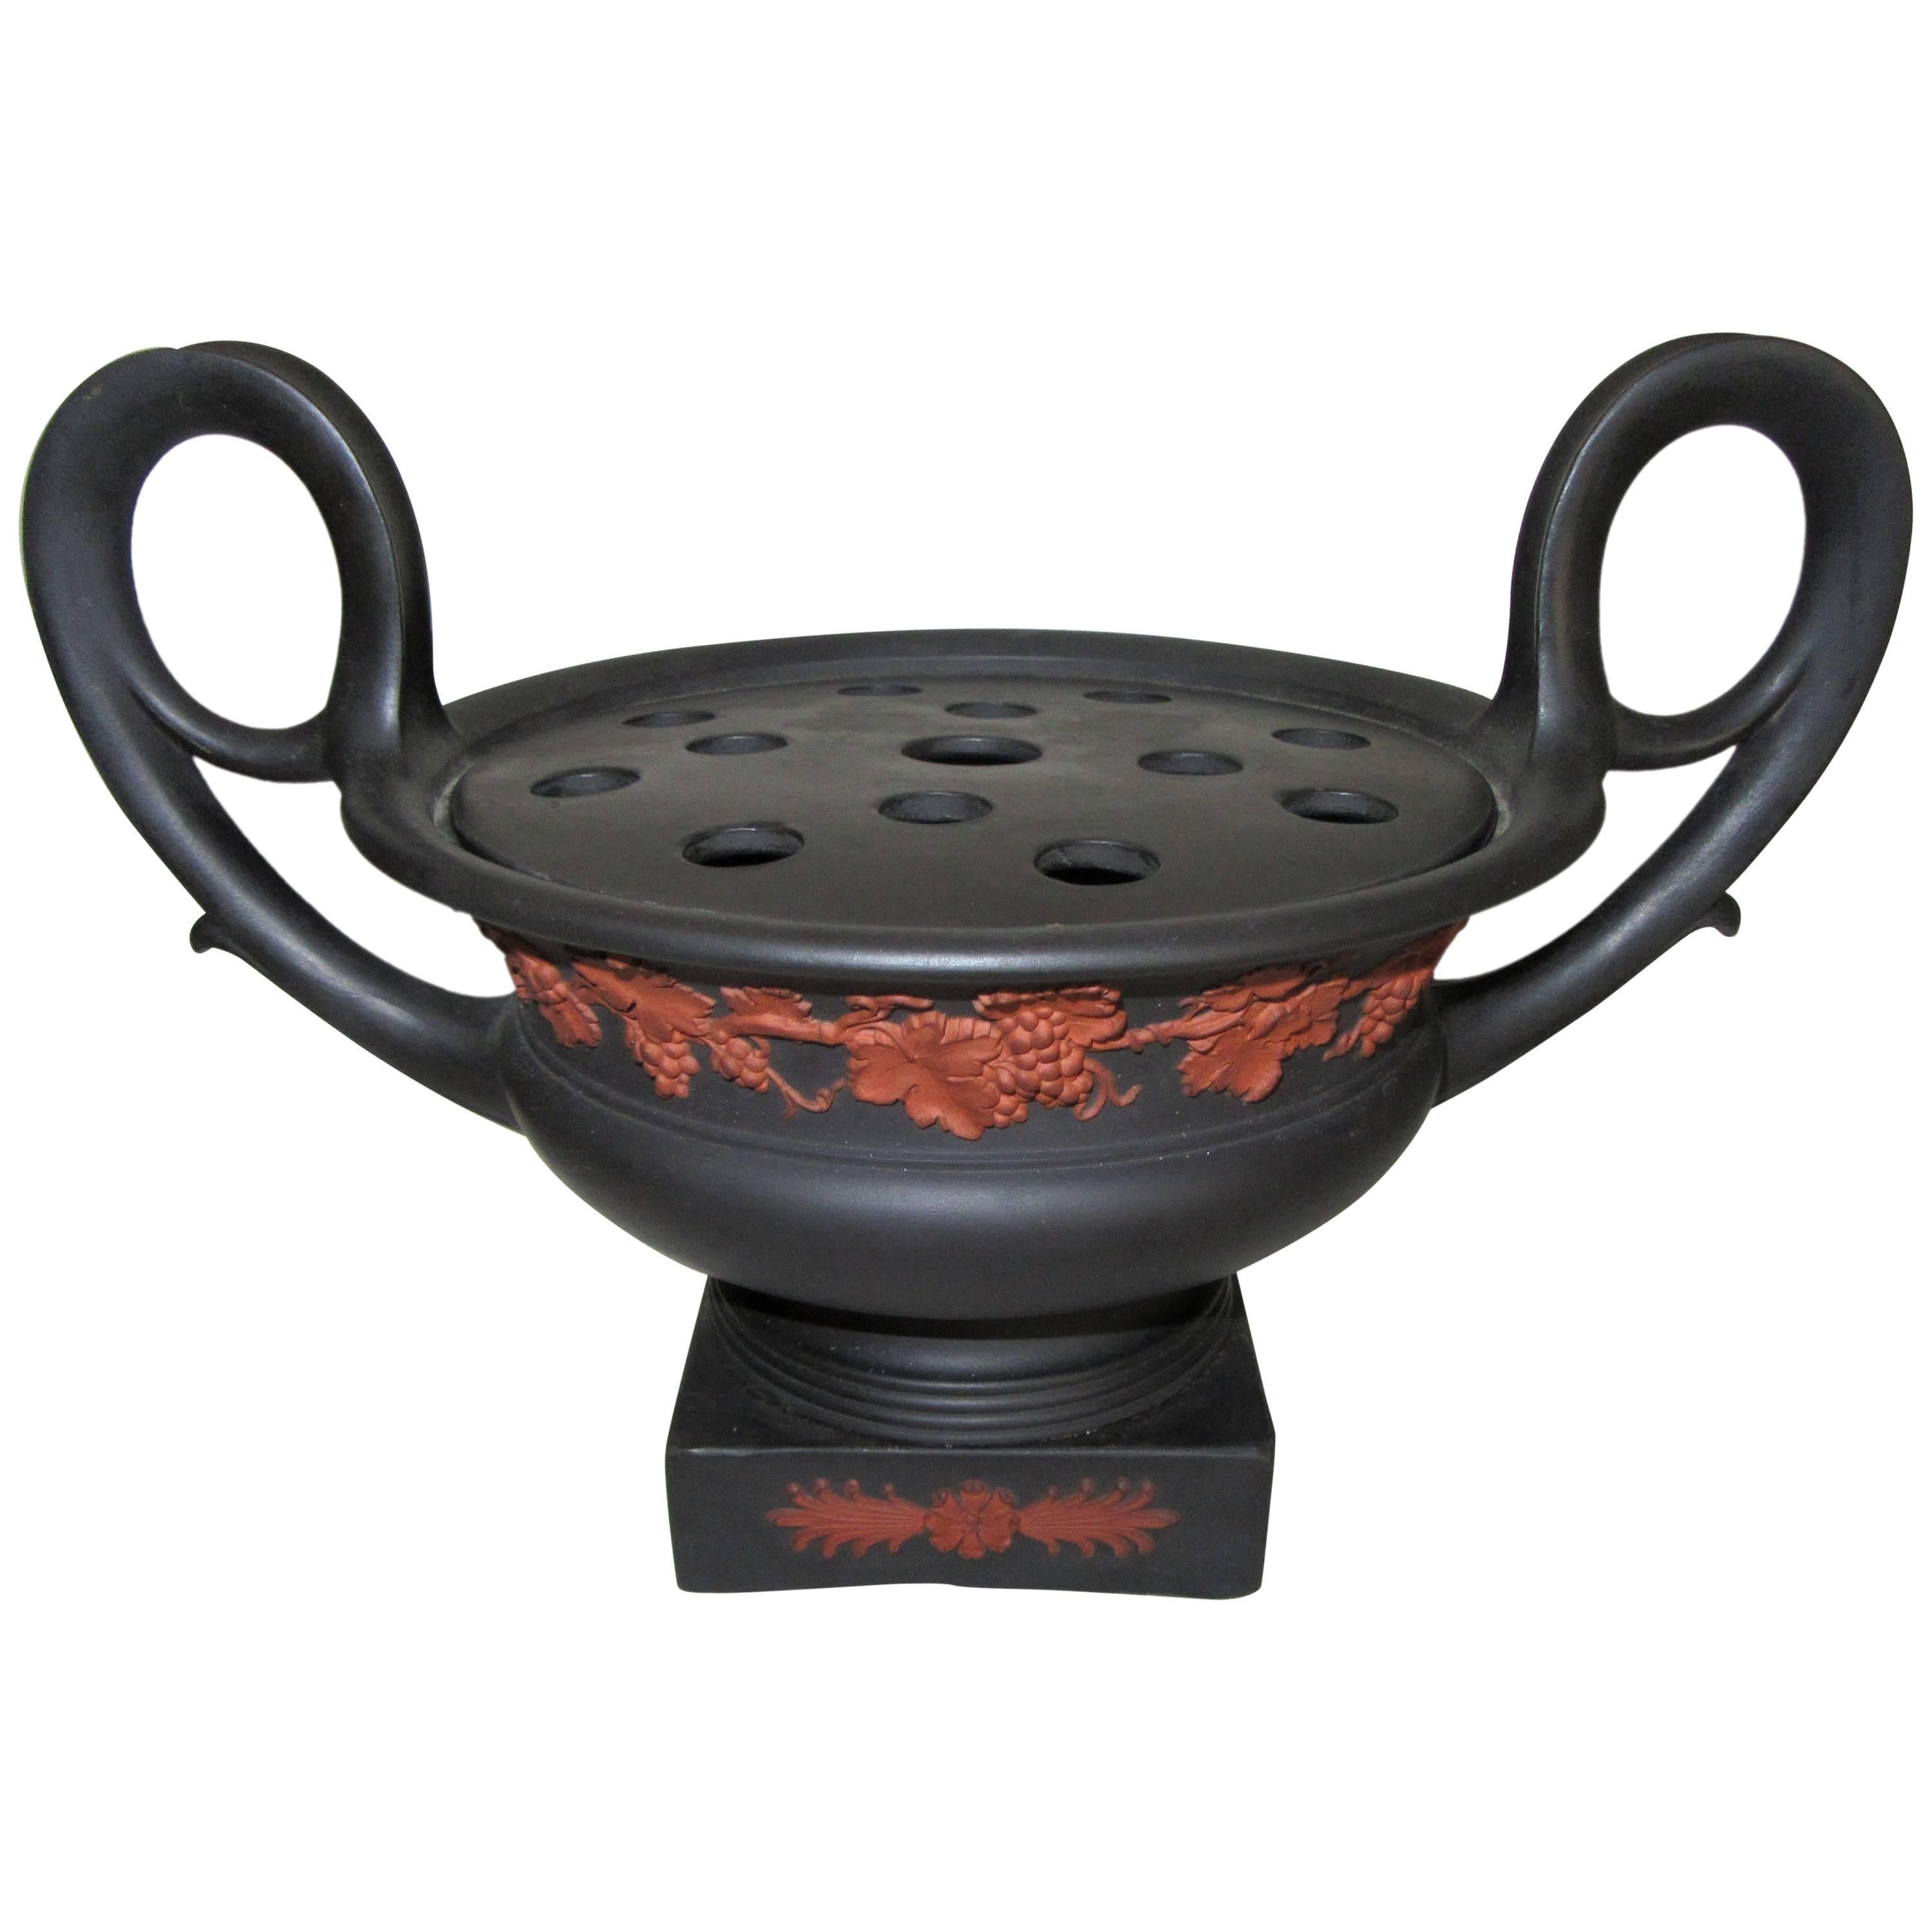 Wedgwood Black Basalt and Rosso Antico Bough Pot